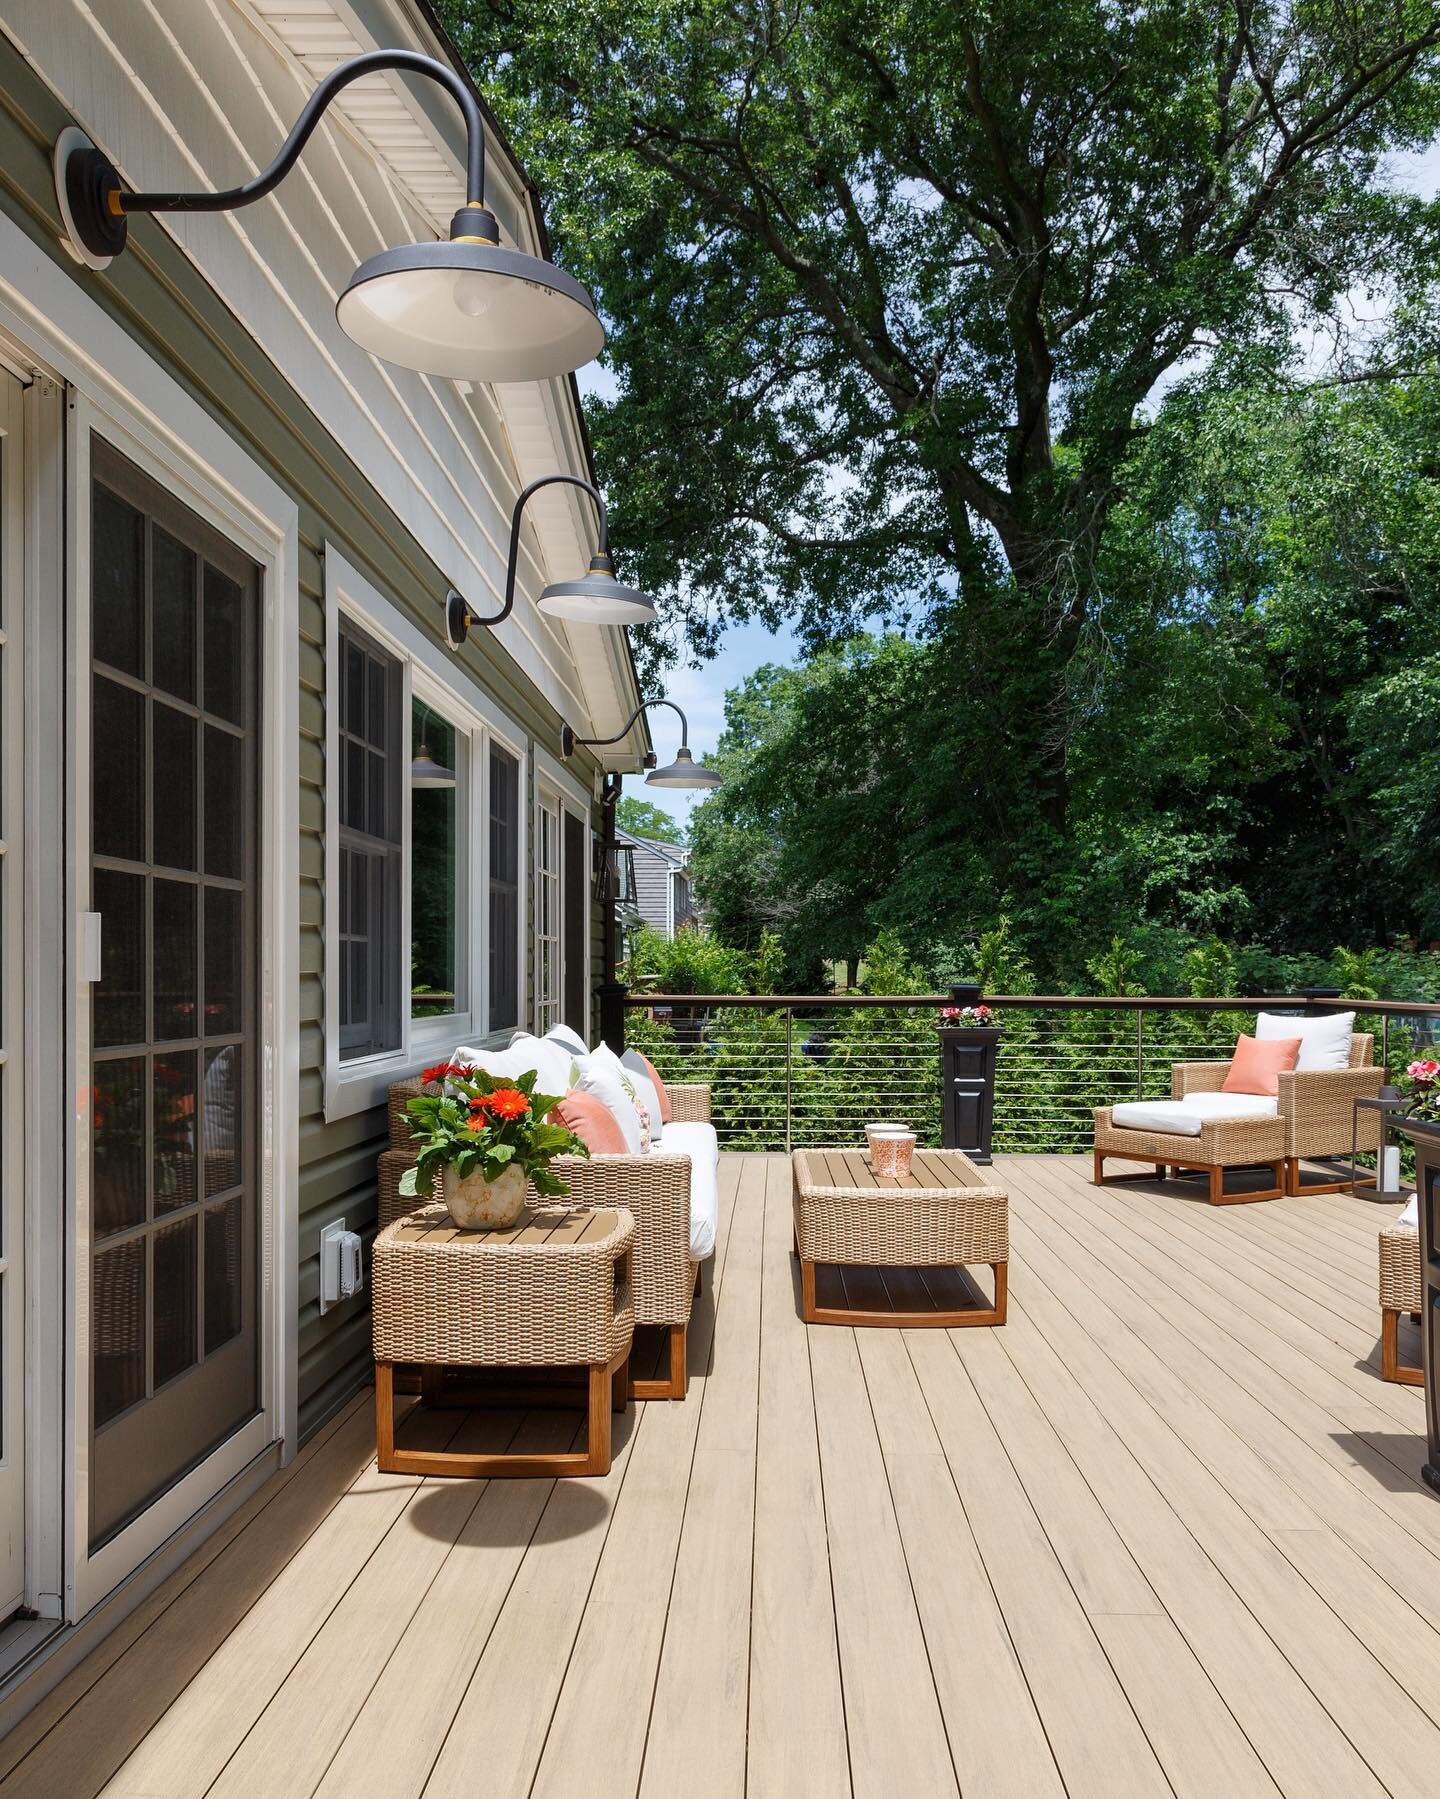 Ready for Spring: this deck connects to the kitchen and great room of the home, making entertaining a breeze. The sculptural lighting provides light where needed while minimizing light pollution #deck #lighting #outdoorliving @mjscontractingcorp phot